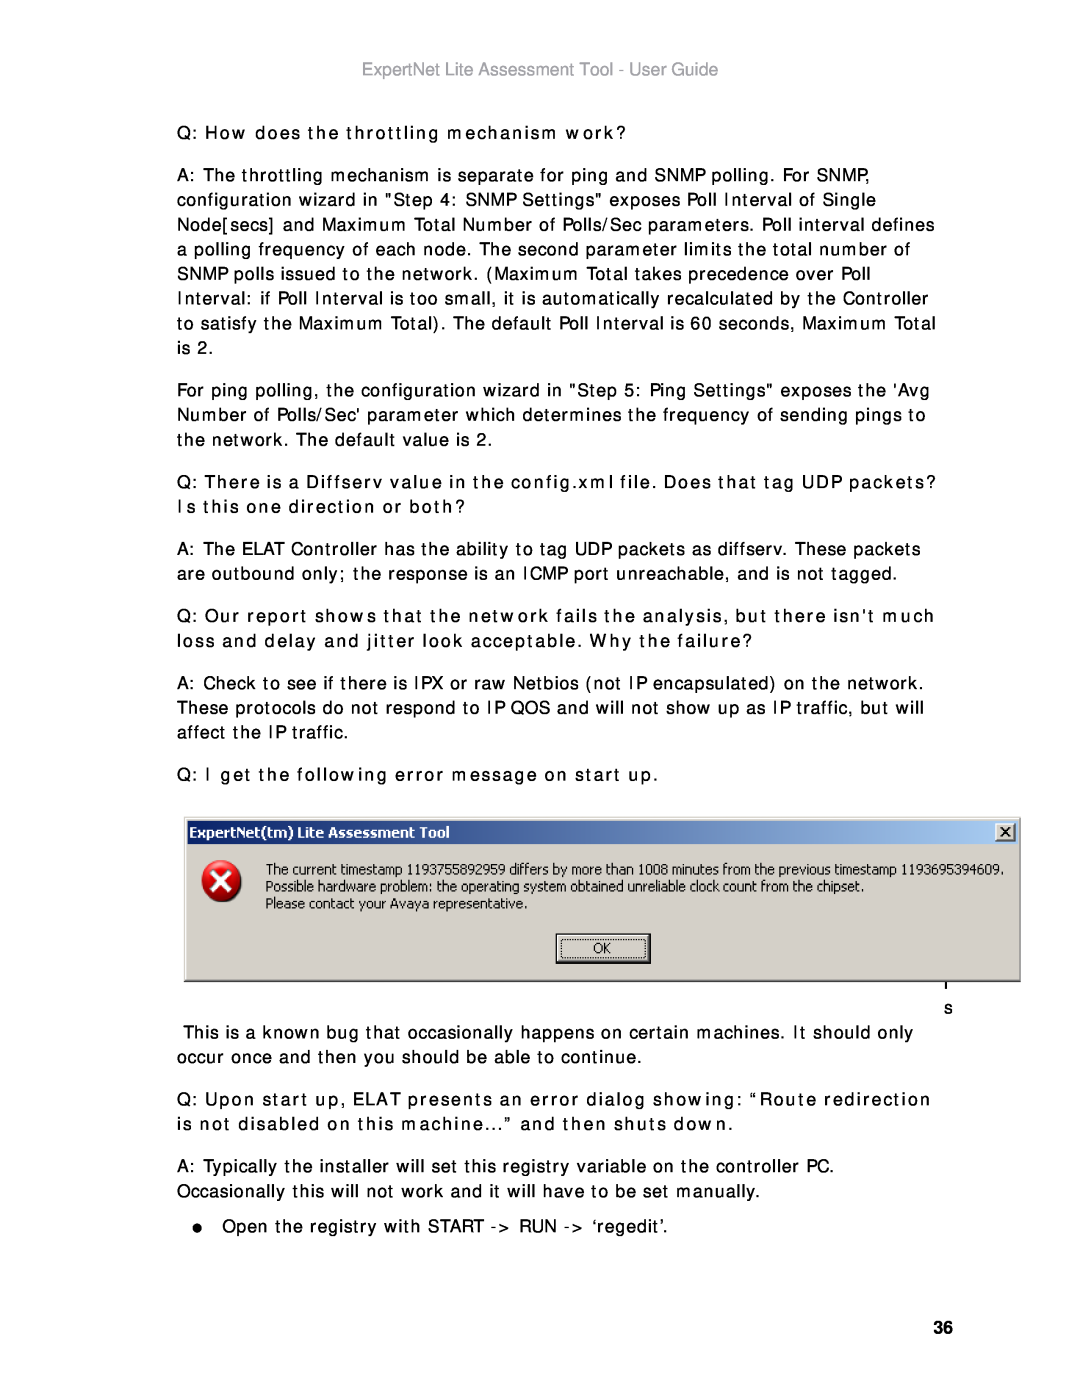 Avaya ELAT manual Q How does the throttling mechanism work?, Q I get the following error message on start up 